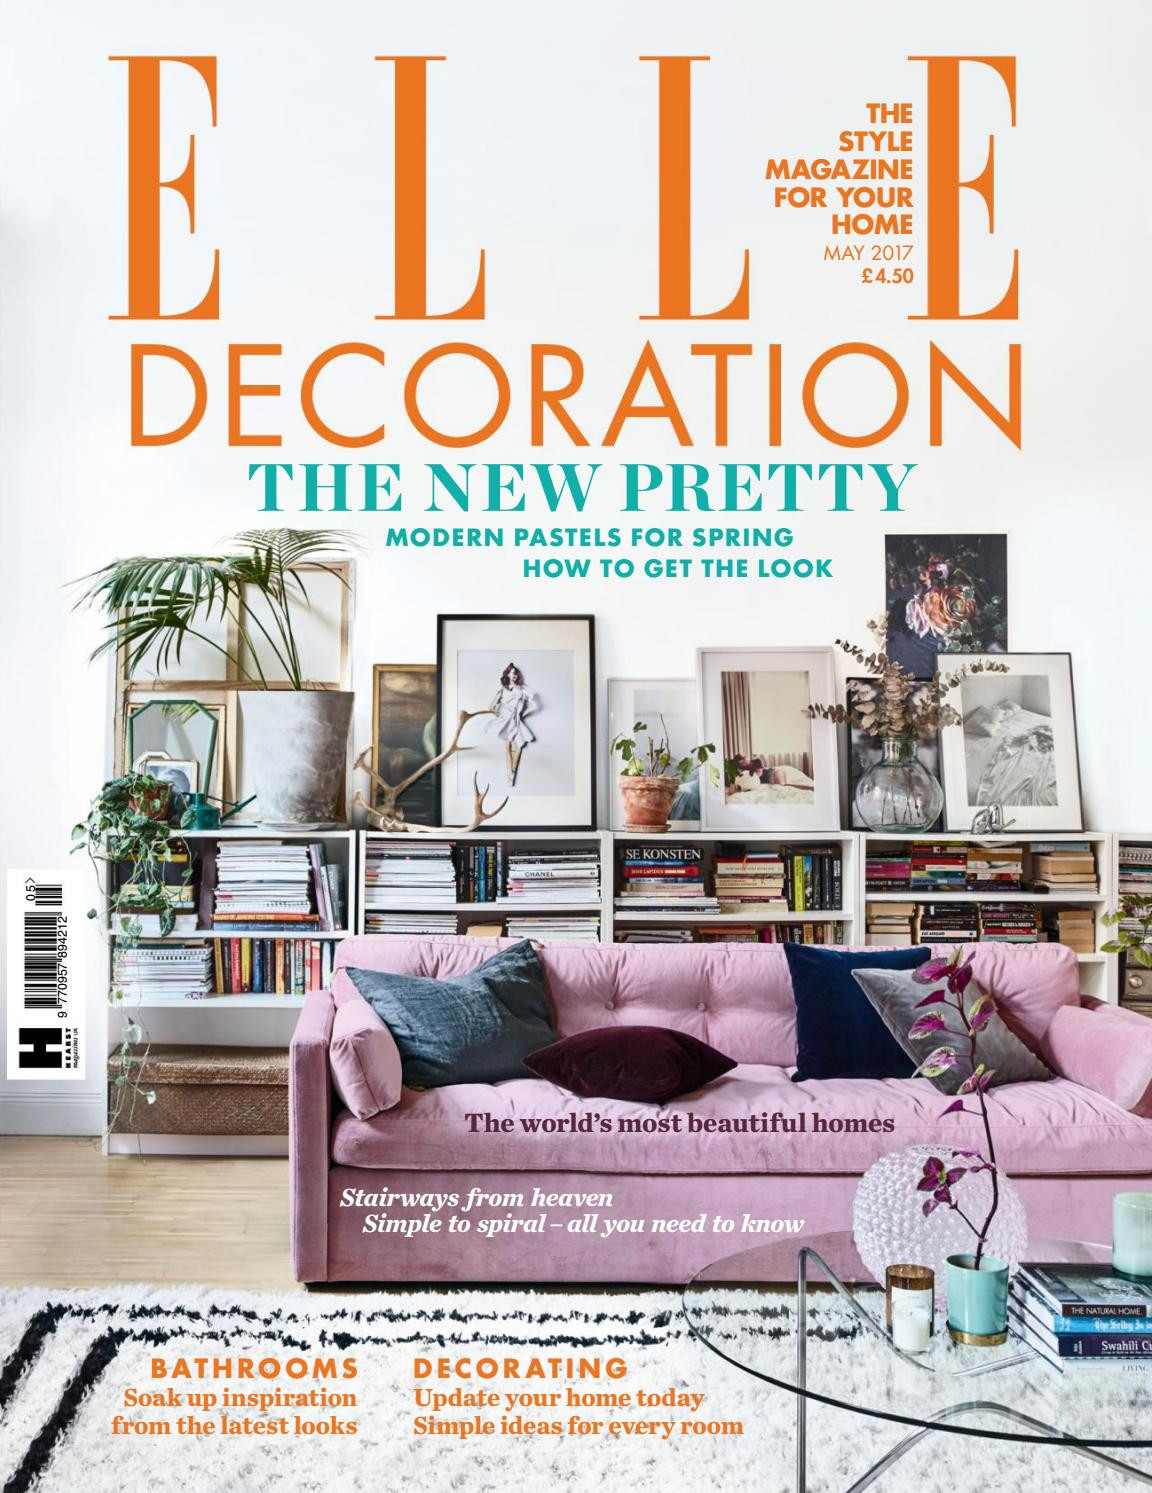 30 Great Jonathan Adler Gala Vase 2024 free download jonathan adler gala vase of elle decoration uk may 2017 by ac290a o taoo haeac29bng daon viaan du lac28bch taoi ha inside elle decoration uk may 2017 by ac290a o taoo haeac29bng daon viaan d